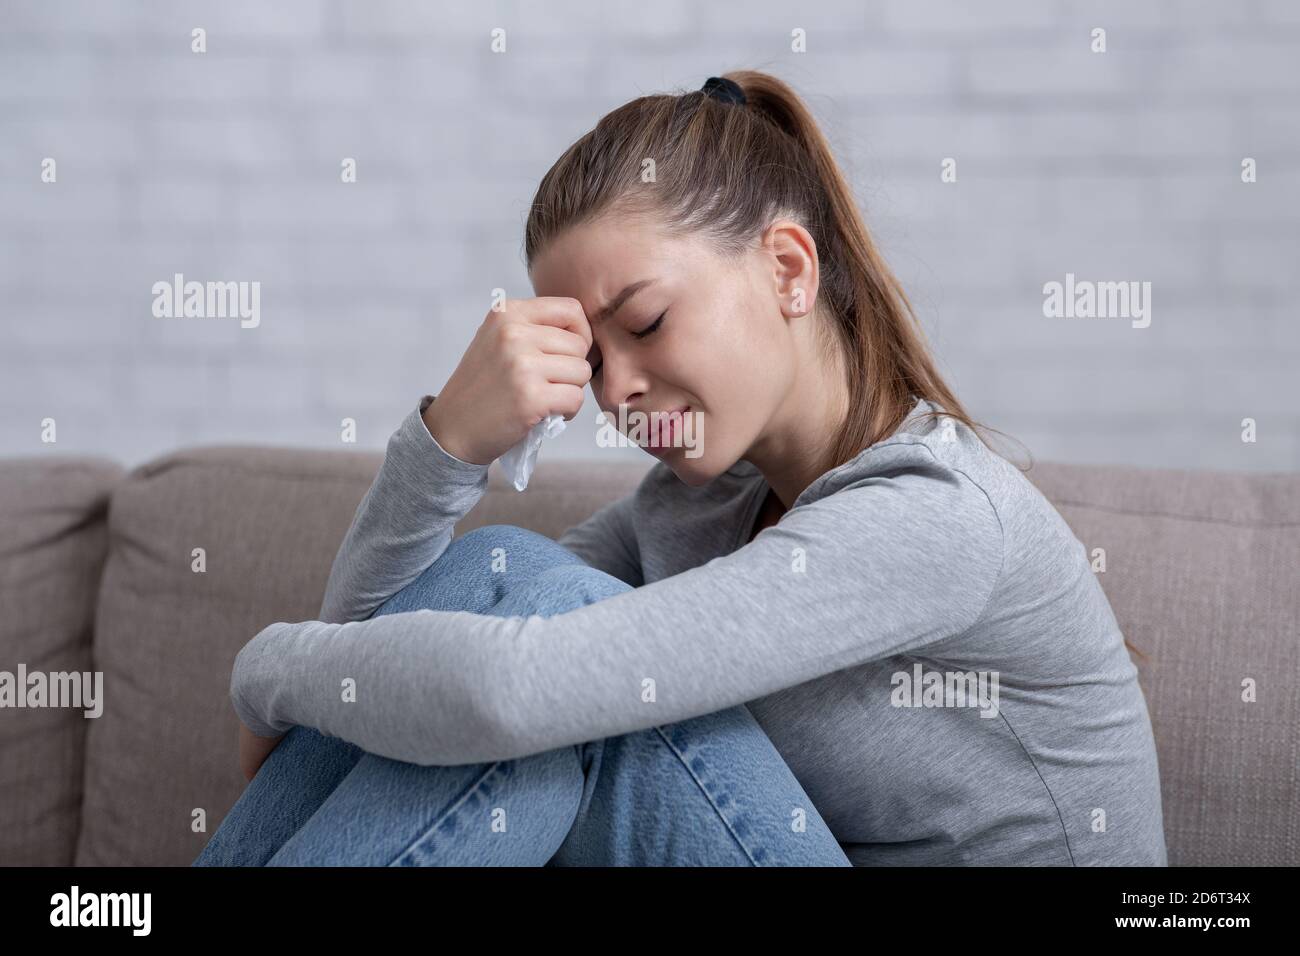 Lonely millennial woman feeling hopeless or desperate, crying on sofa at home Stock Photo